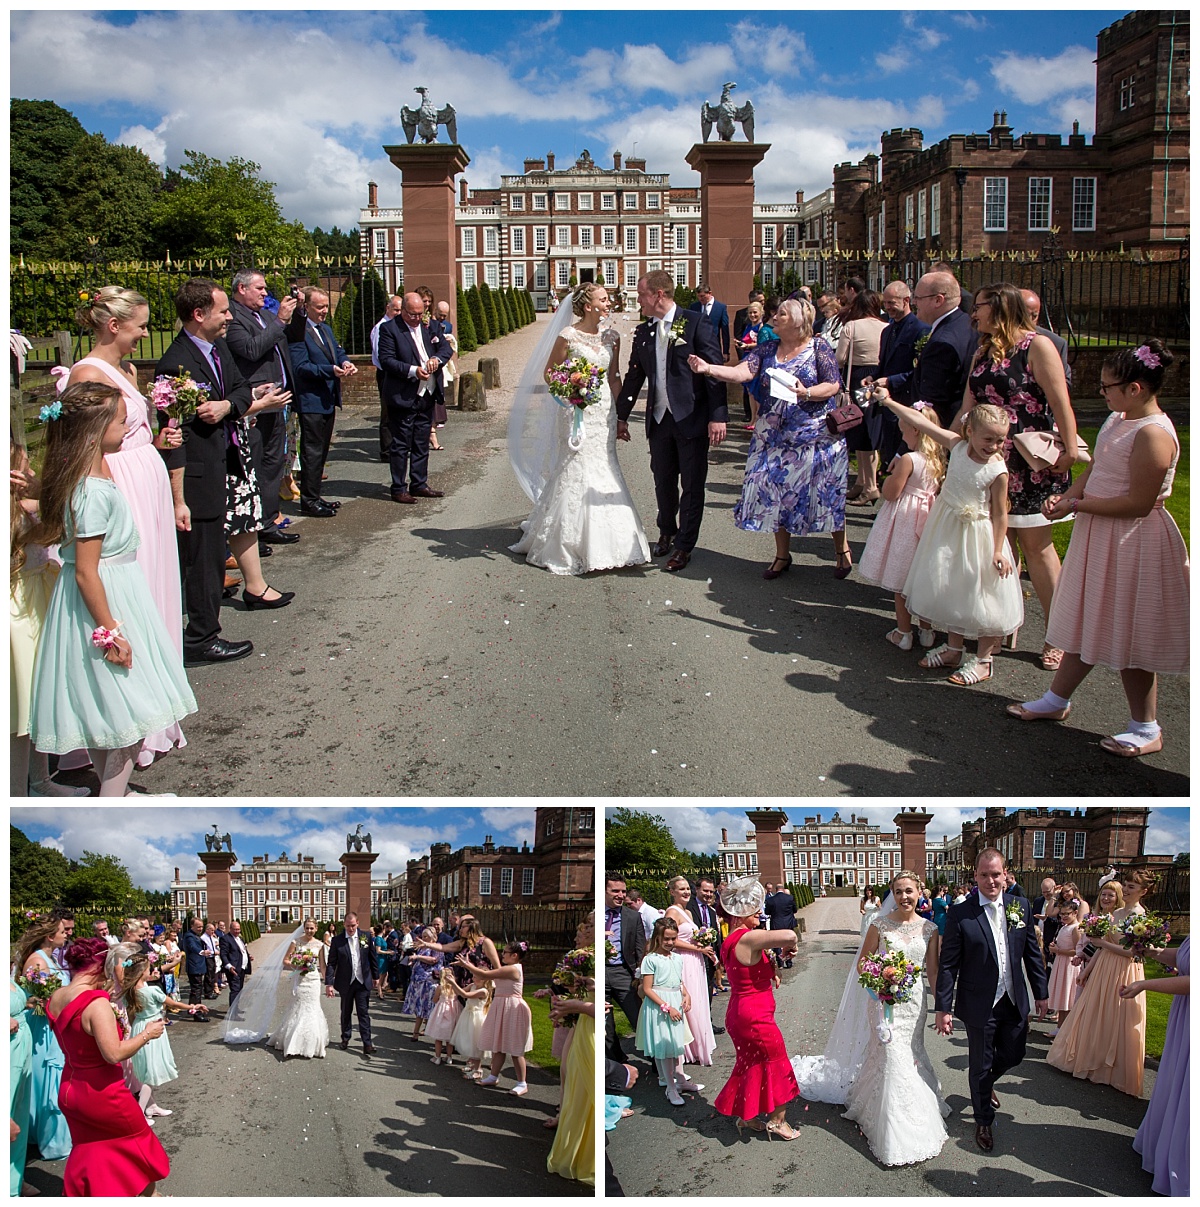 Wedding Photography Manchester - Mel and Lewis's Epic Wedding Day At Knowsley Hall 17